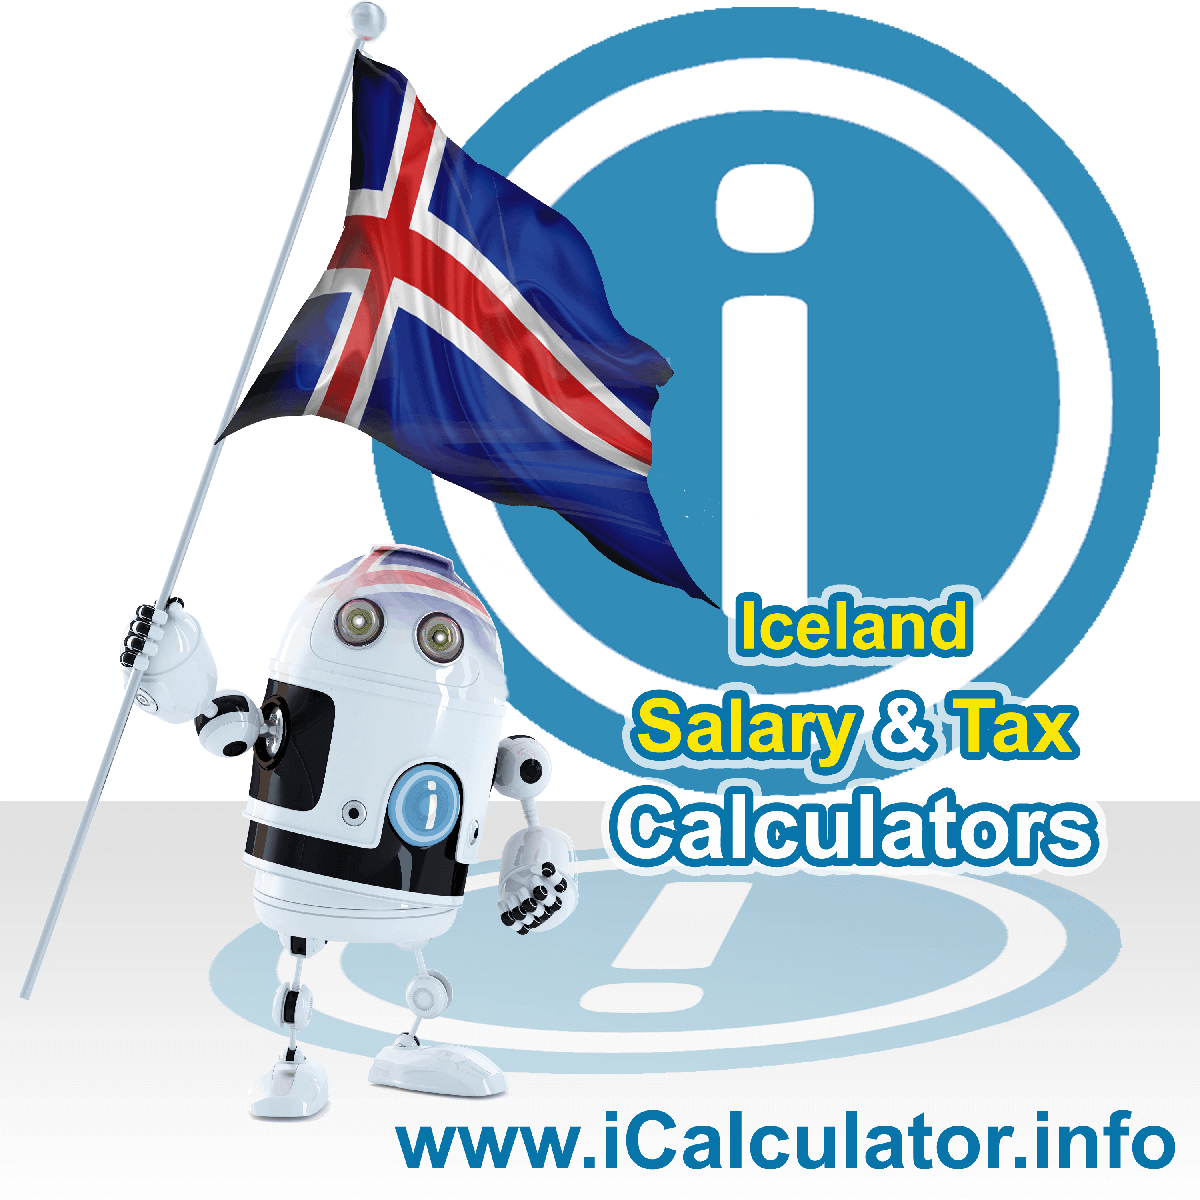 Iceland Tax Calculator. This image shows the Iceland flag and information relating to the tax formula for the Iceland Salary Calculator